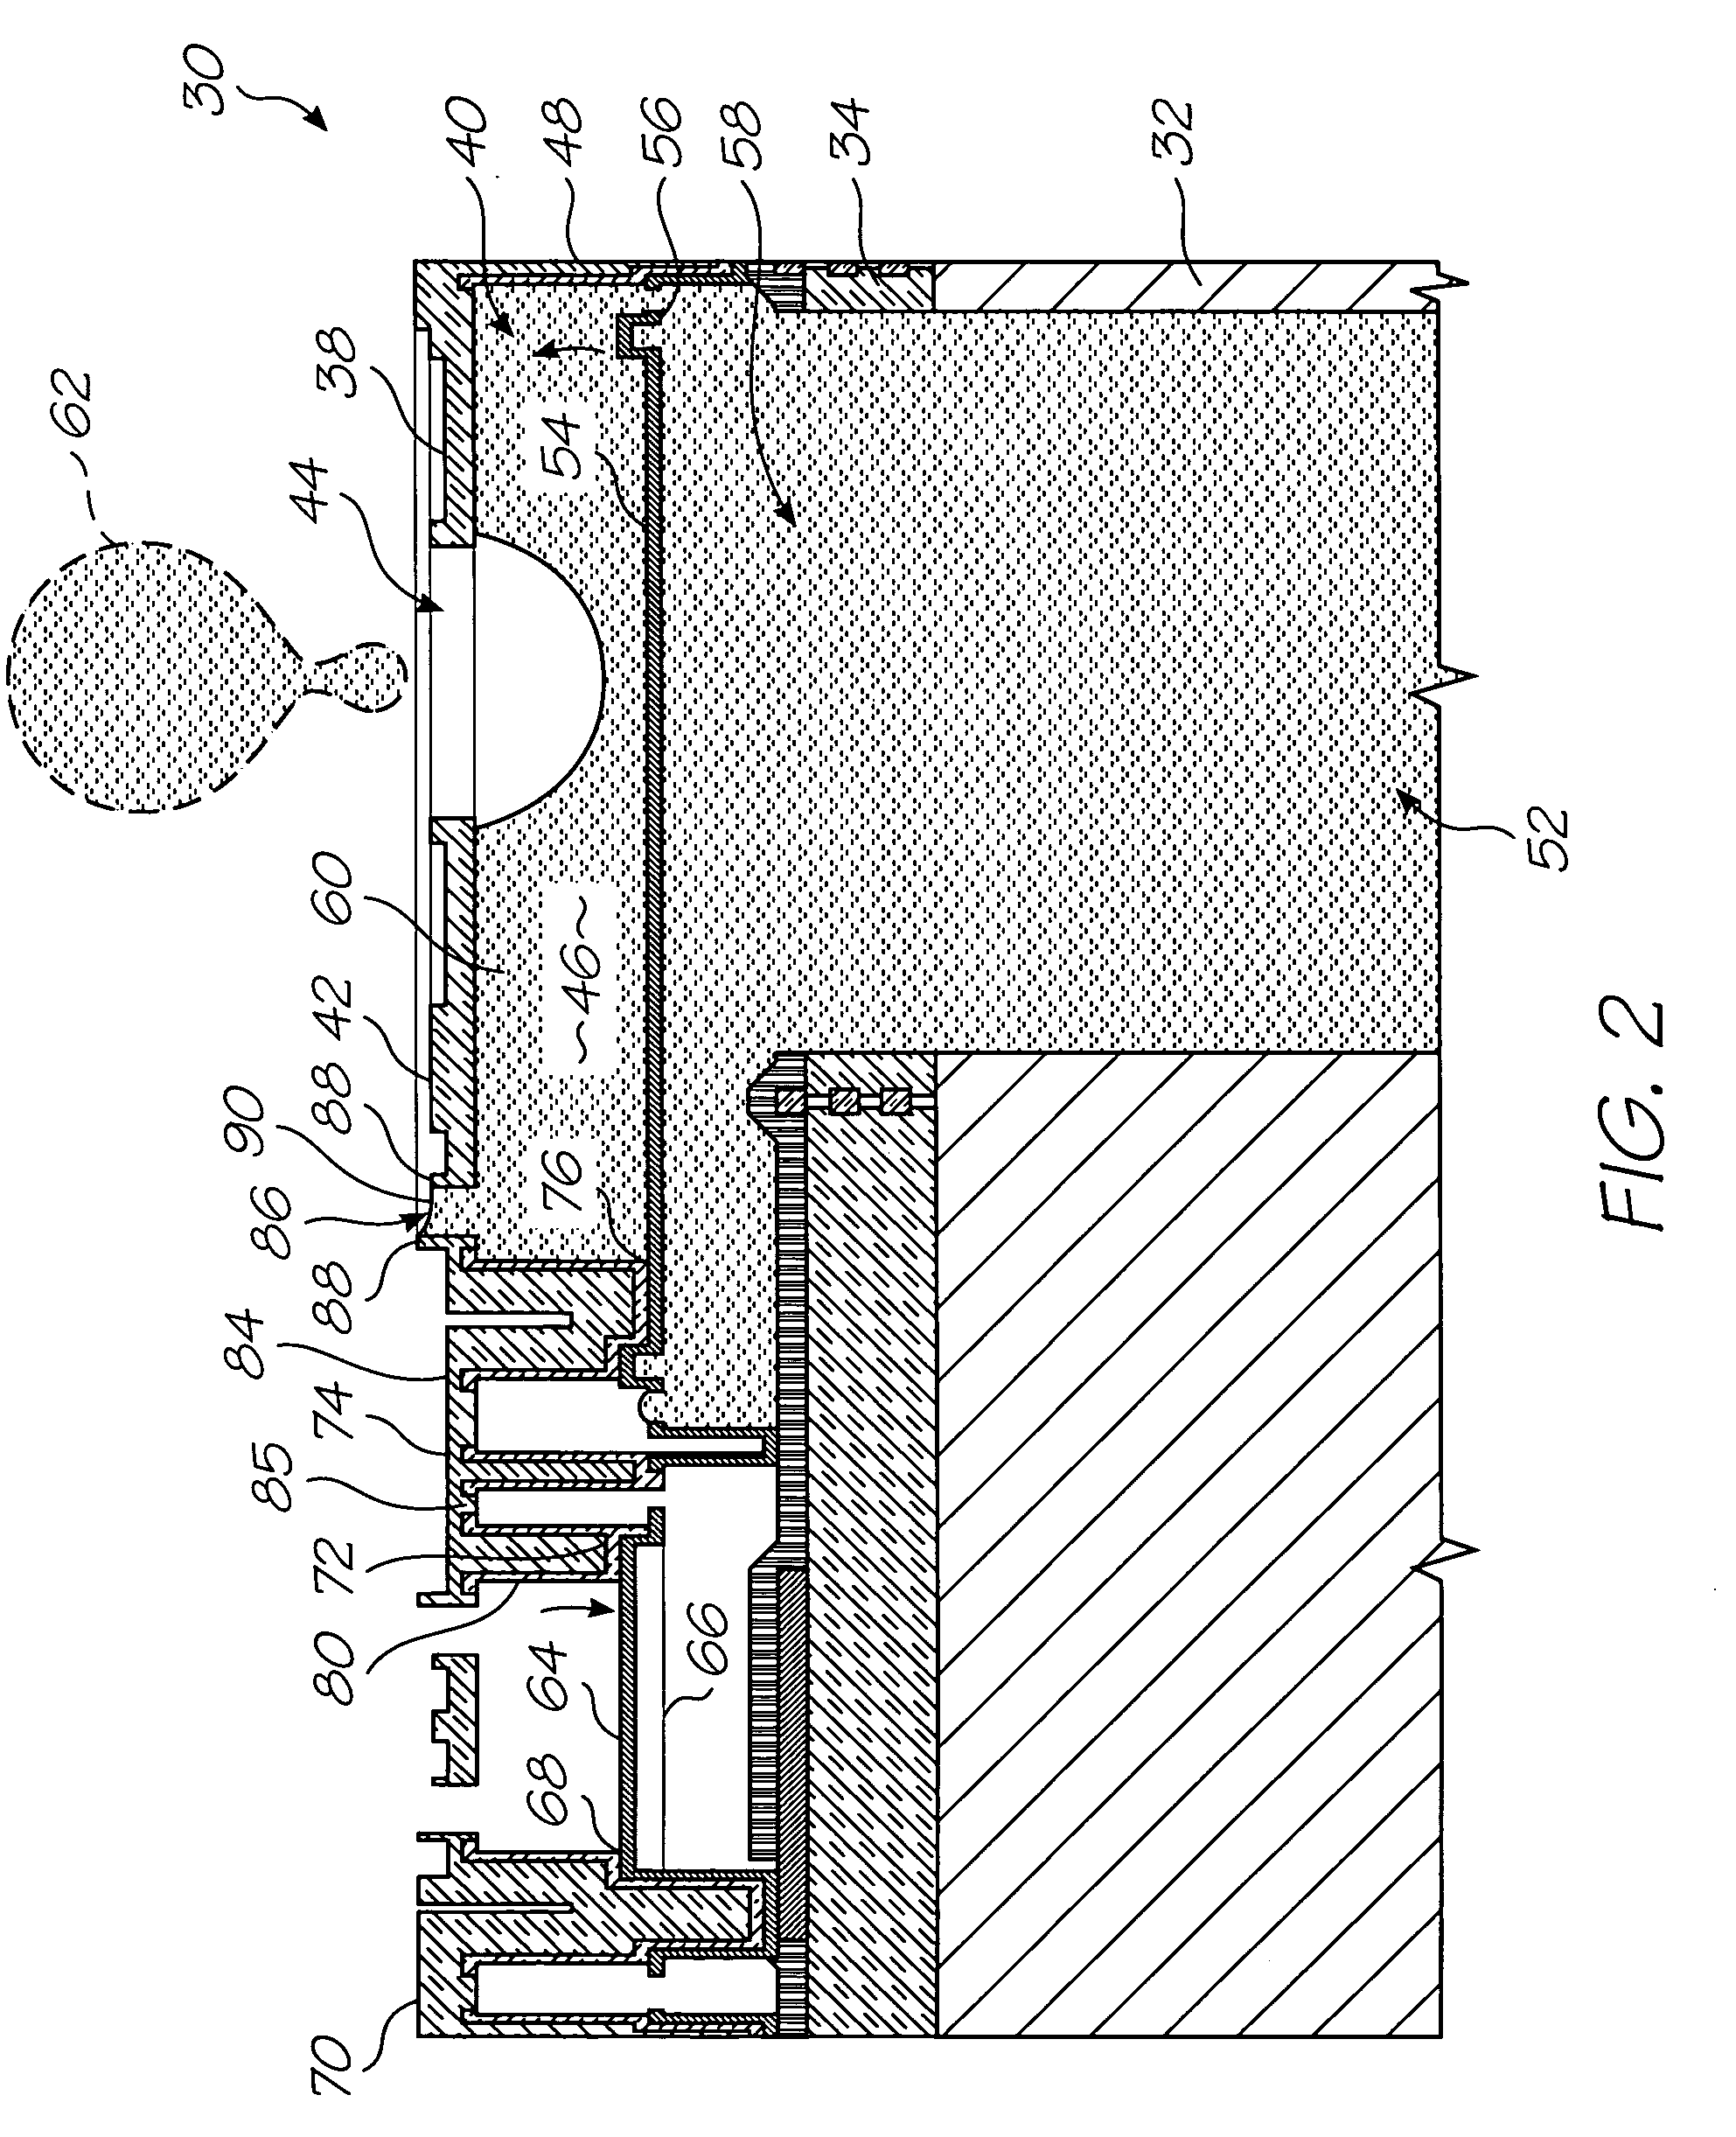 Printhead chip that incorporates micro-mechanical lever mechanisms